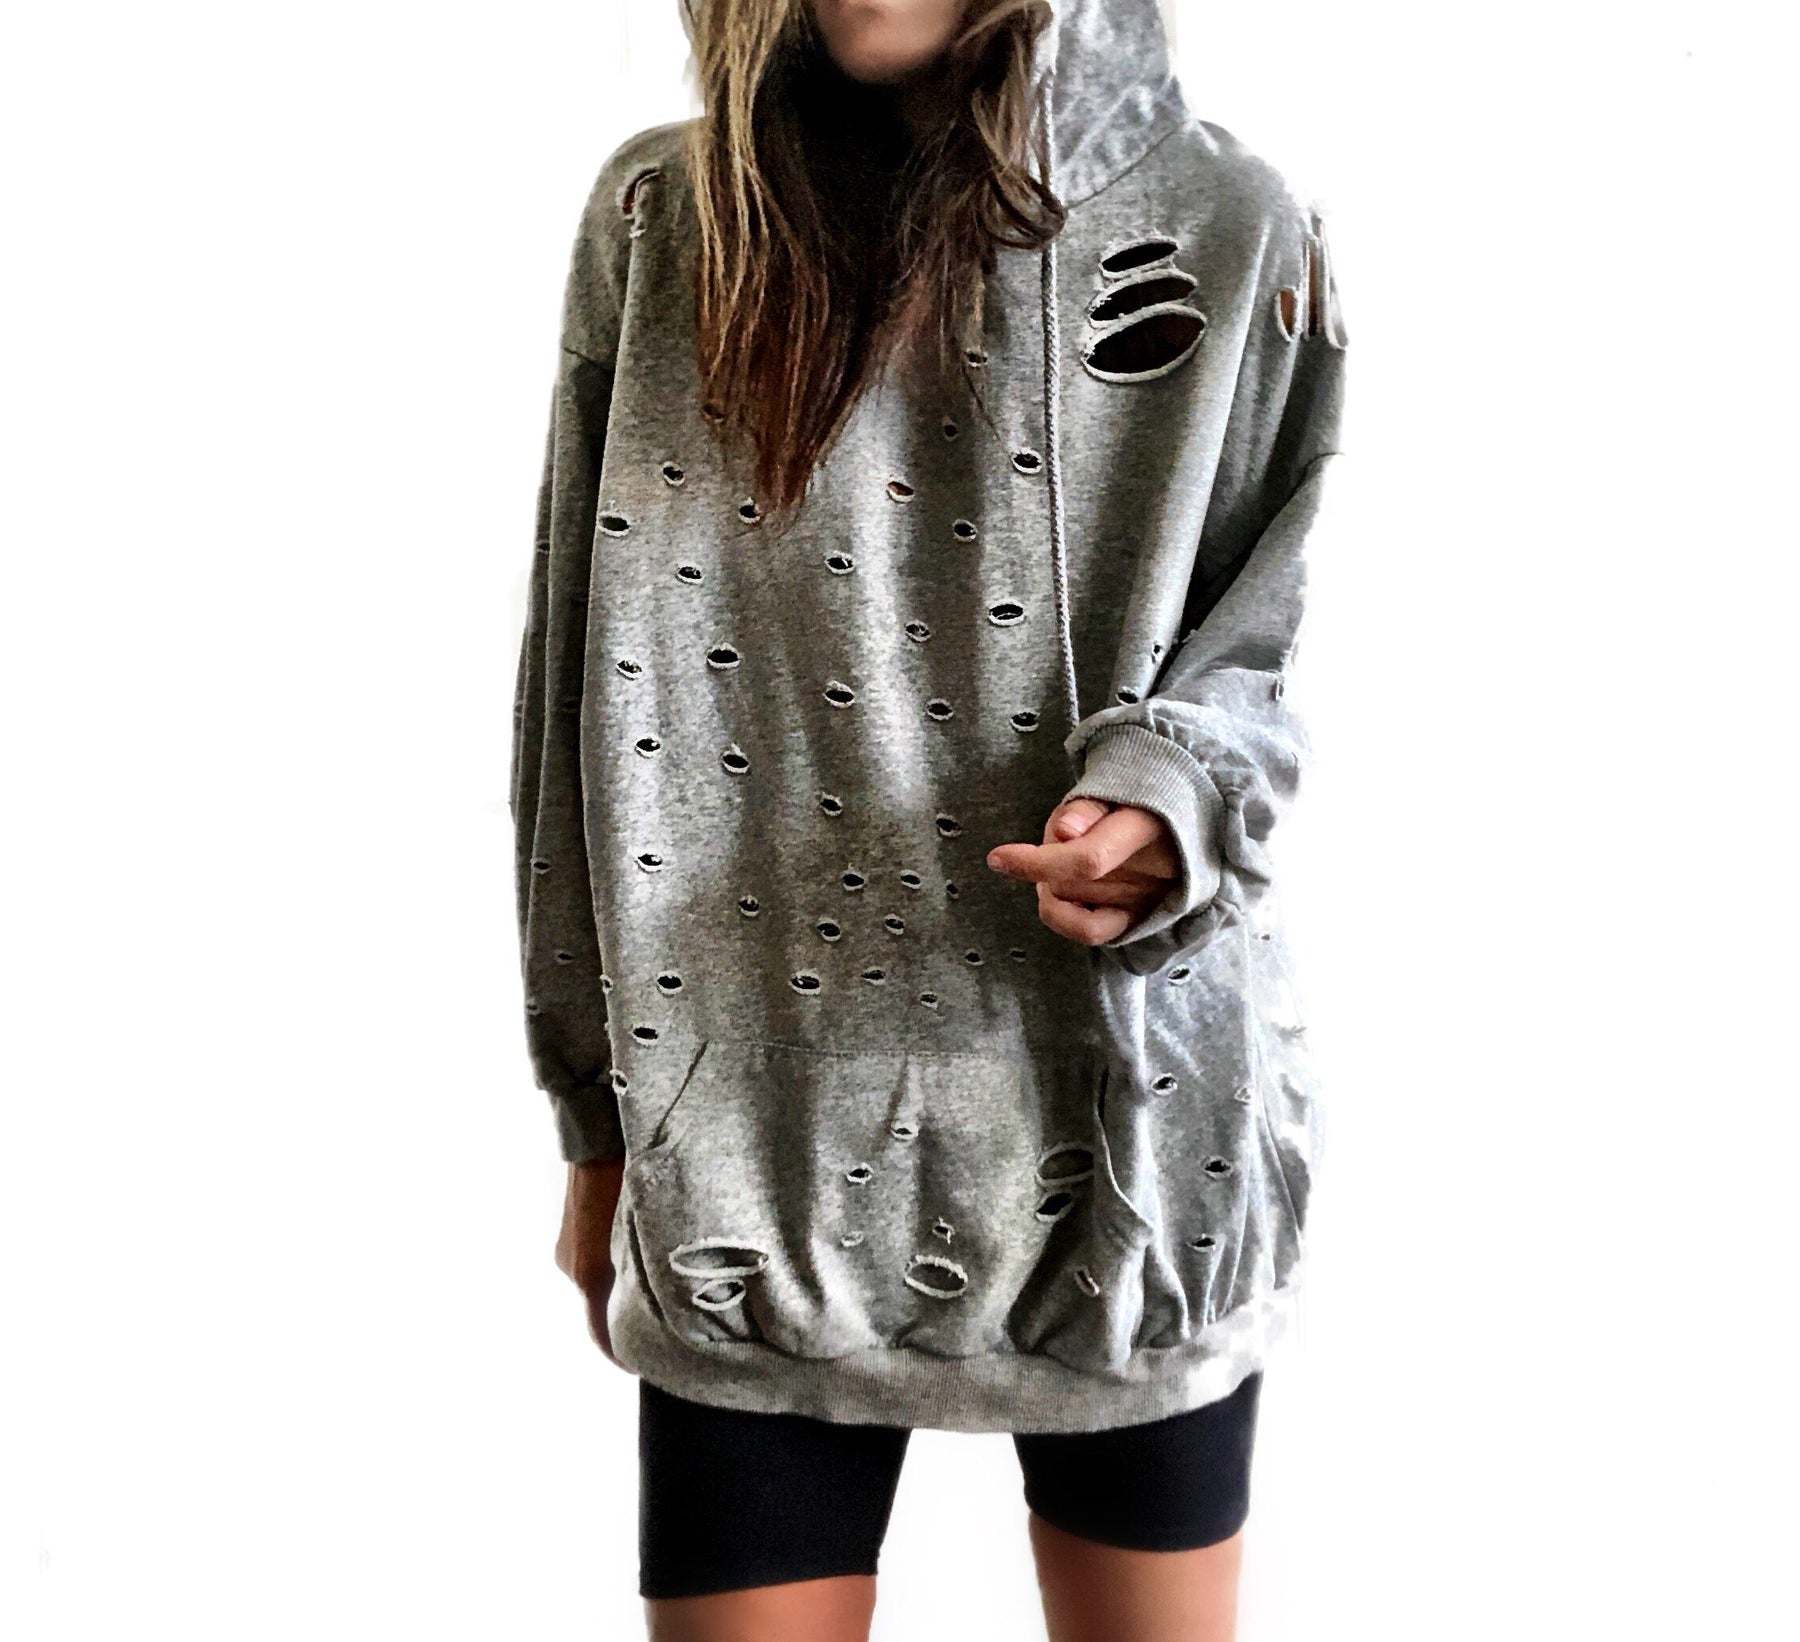 The perfect oversized, gray, distressed hoodie. LOCALS ONLY painted in back in with NYC 2019 in small along edge of hood. Signed @wrenandglory.